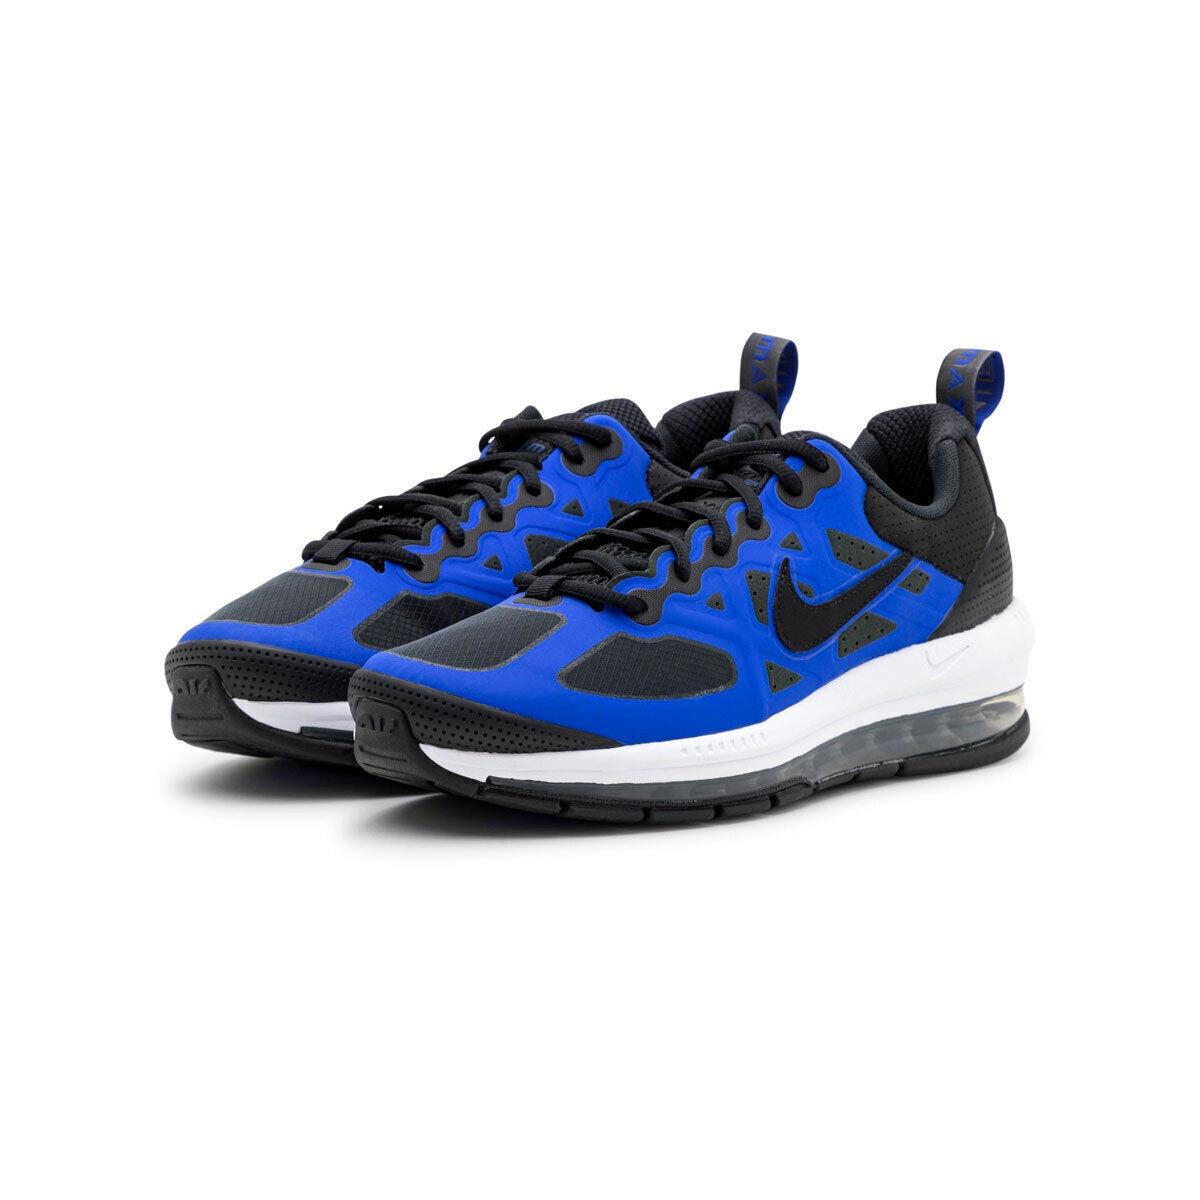 Nike shoes Air Max Genome - RACER BLUE BLACK WHITE 0